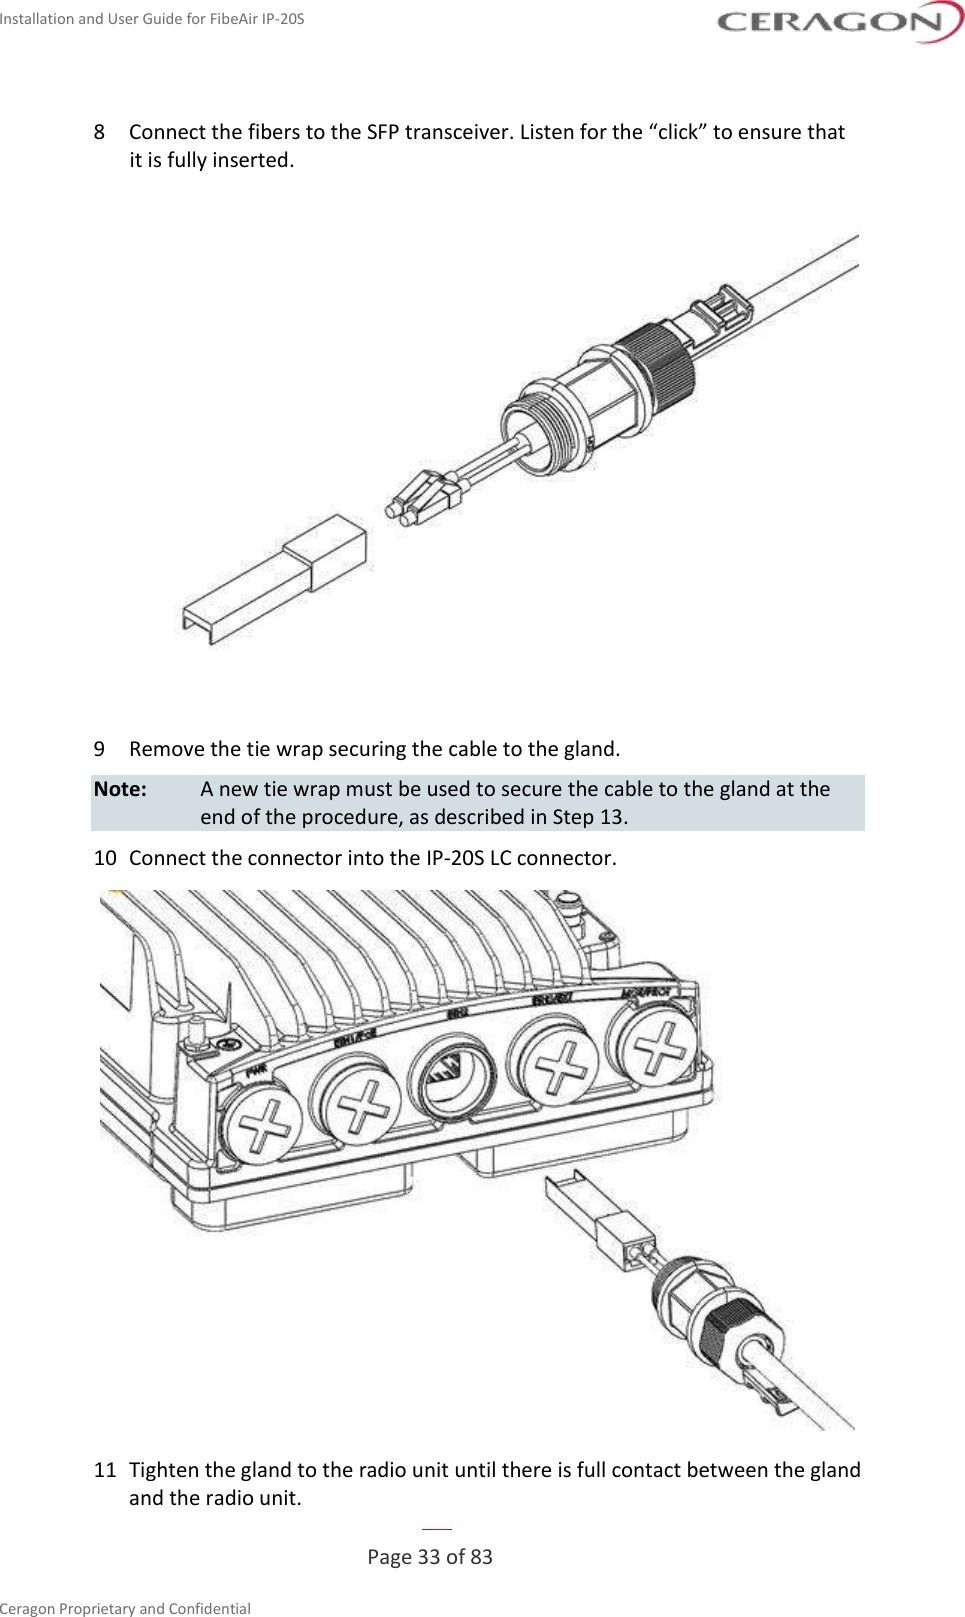 Installation and User Guide for FibeAir IP-20S   Page 33 of 83  Ceragon Proprietary and Confidential     8  Connect the fibers to the SFP transceiver. Listen for the “click” to ensure that it is fully inserted.  9  Remove the tie wrap securing the cable to the gland. Note:  A new tie wrap must be used to secure the cable to the gland at the end of the procedure, as described in Step 13. 10  Connect the connector into the IP-20S LC connector.  11  Tighten the gland to the radio unit until there is full contact between the gland and the radio unit. 